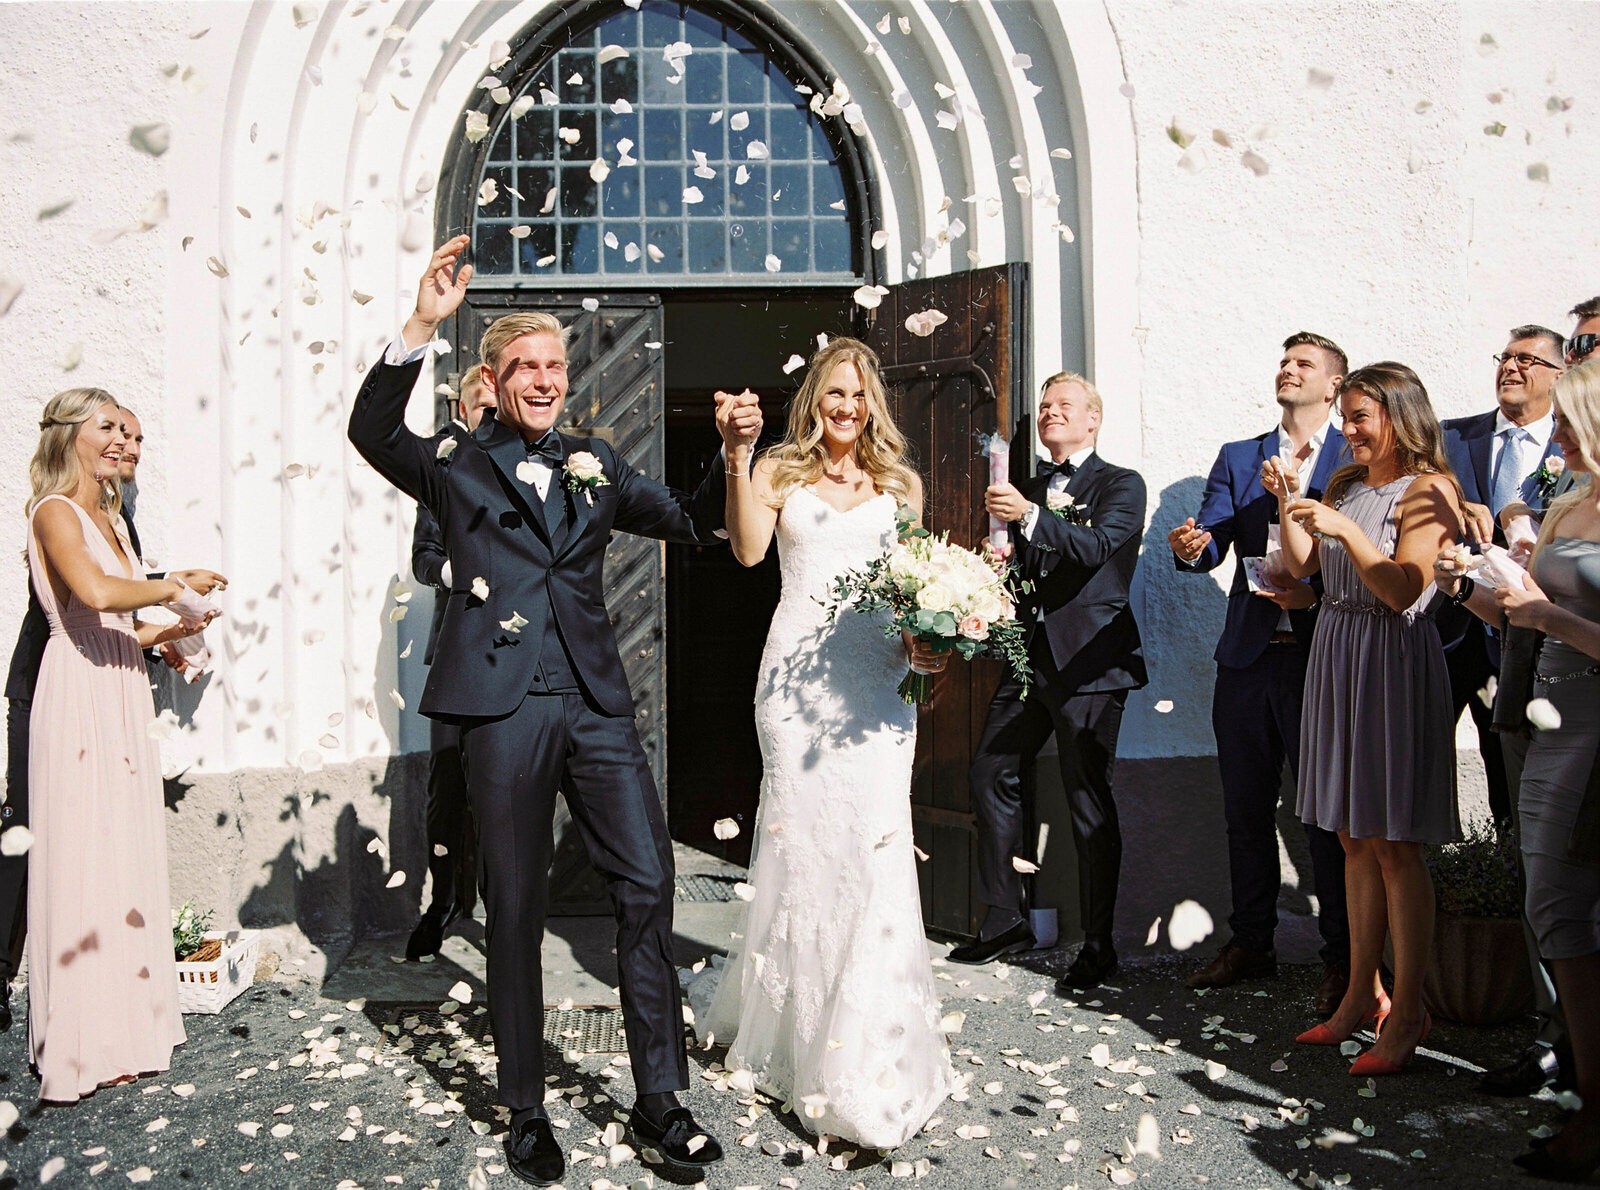 Brides and groom coming out of the church and guests tossing flower petals